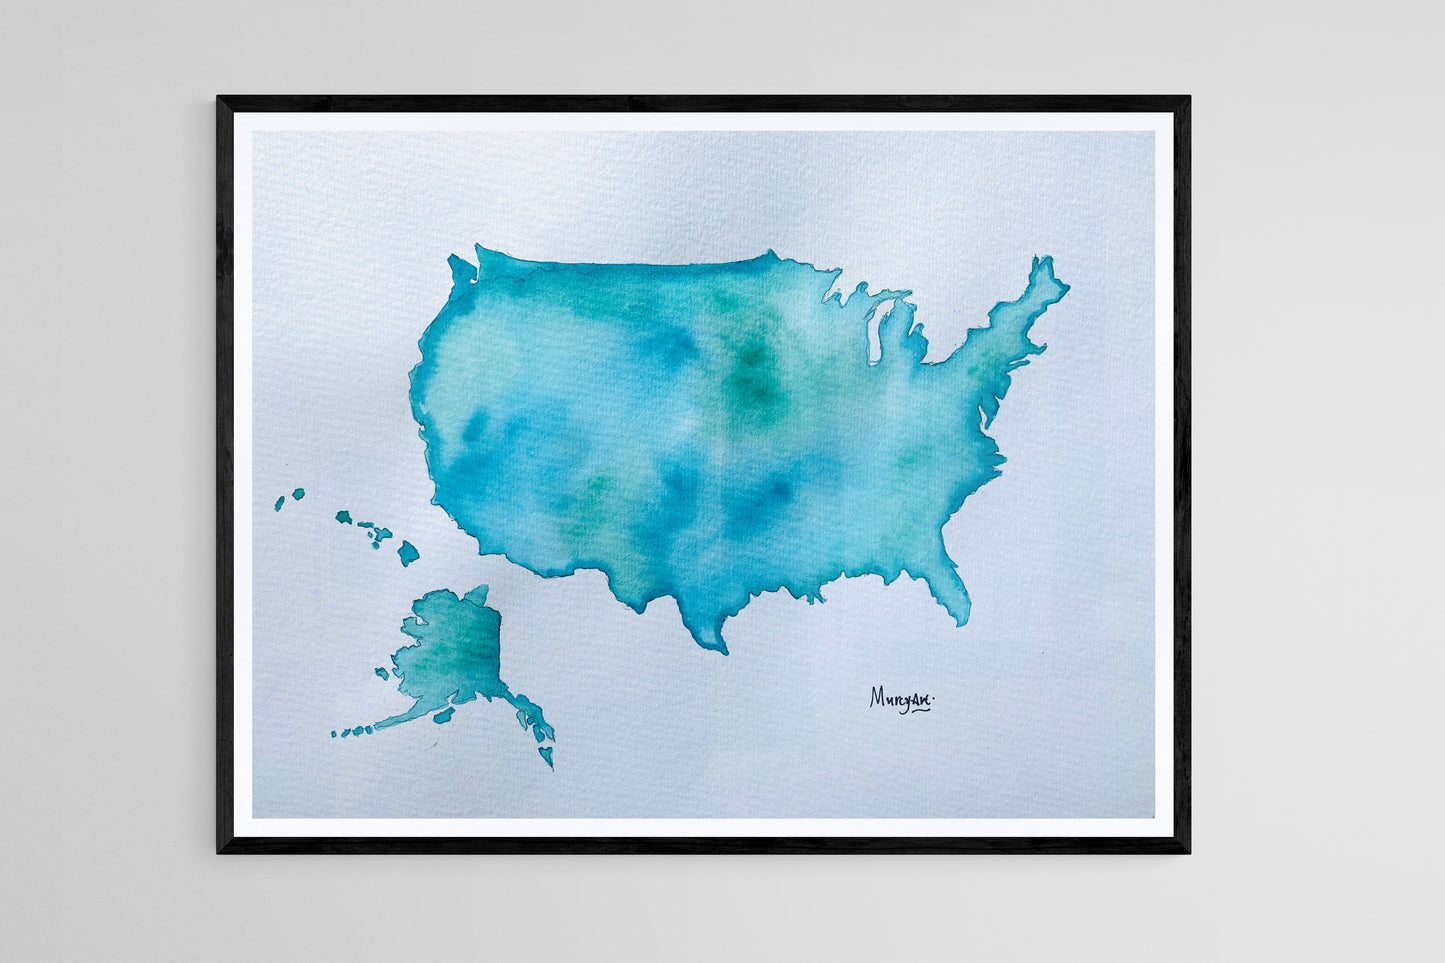 “The United States of America Map”